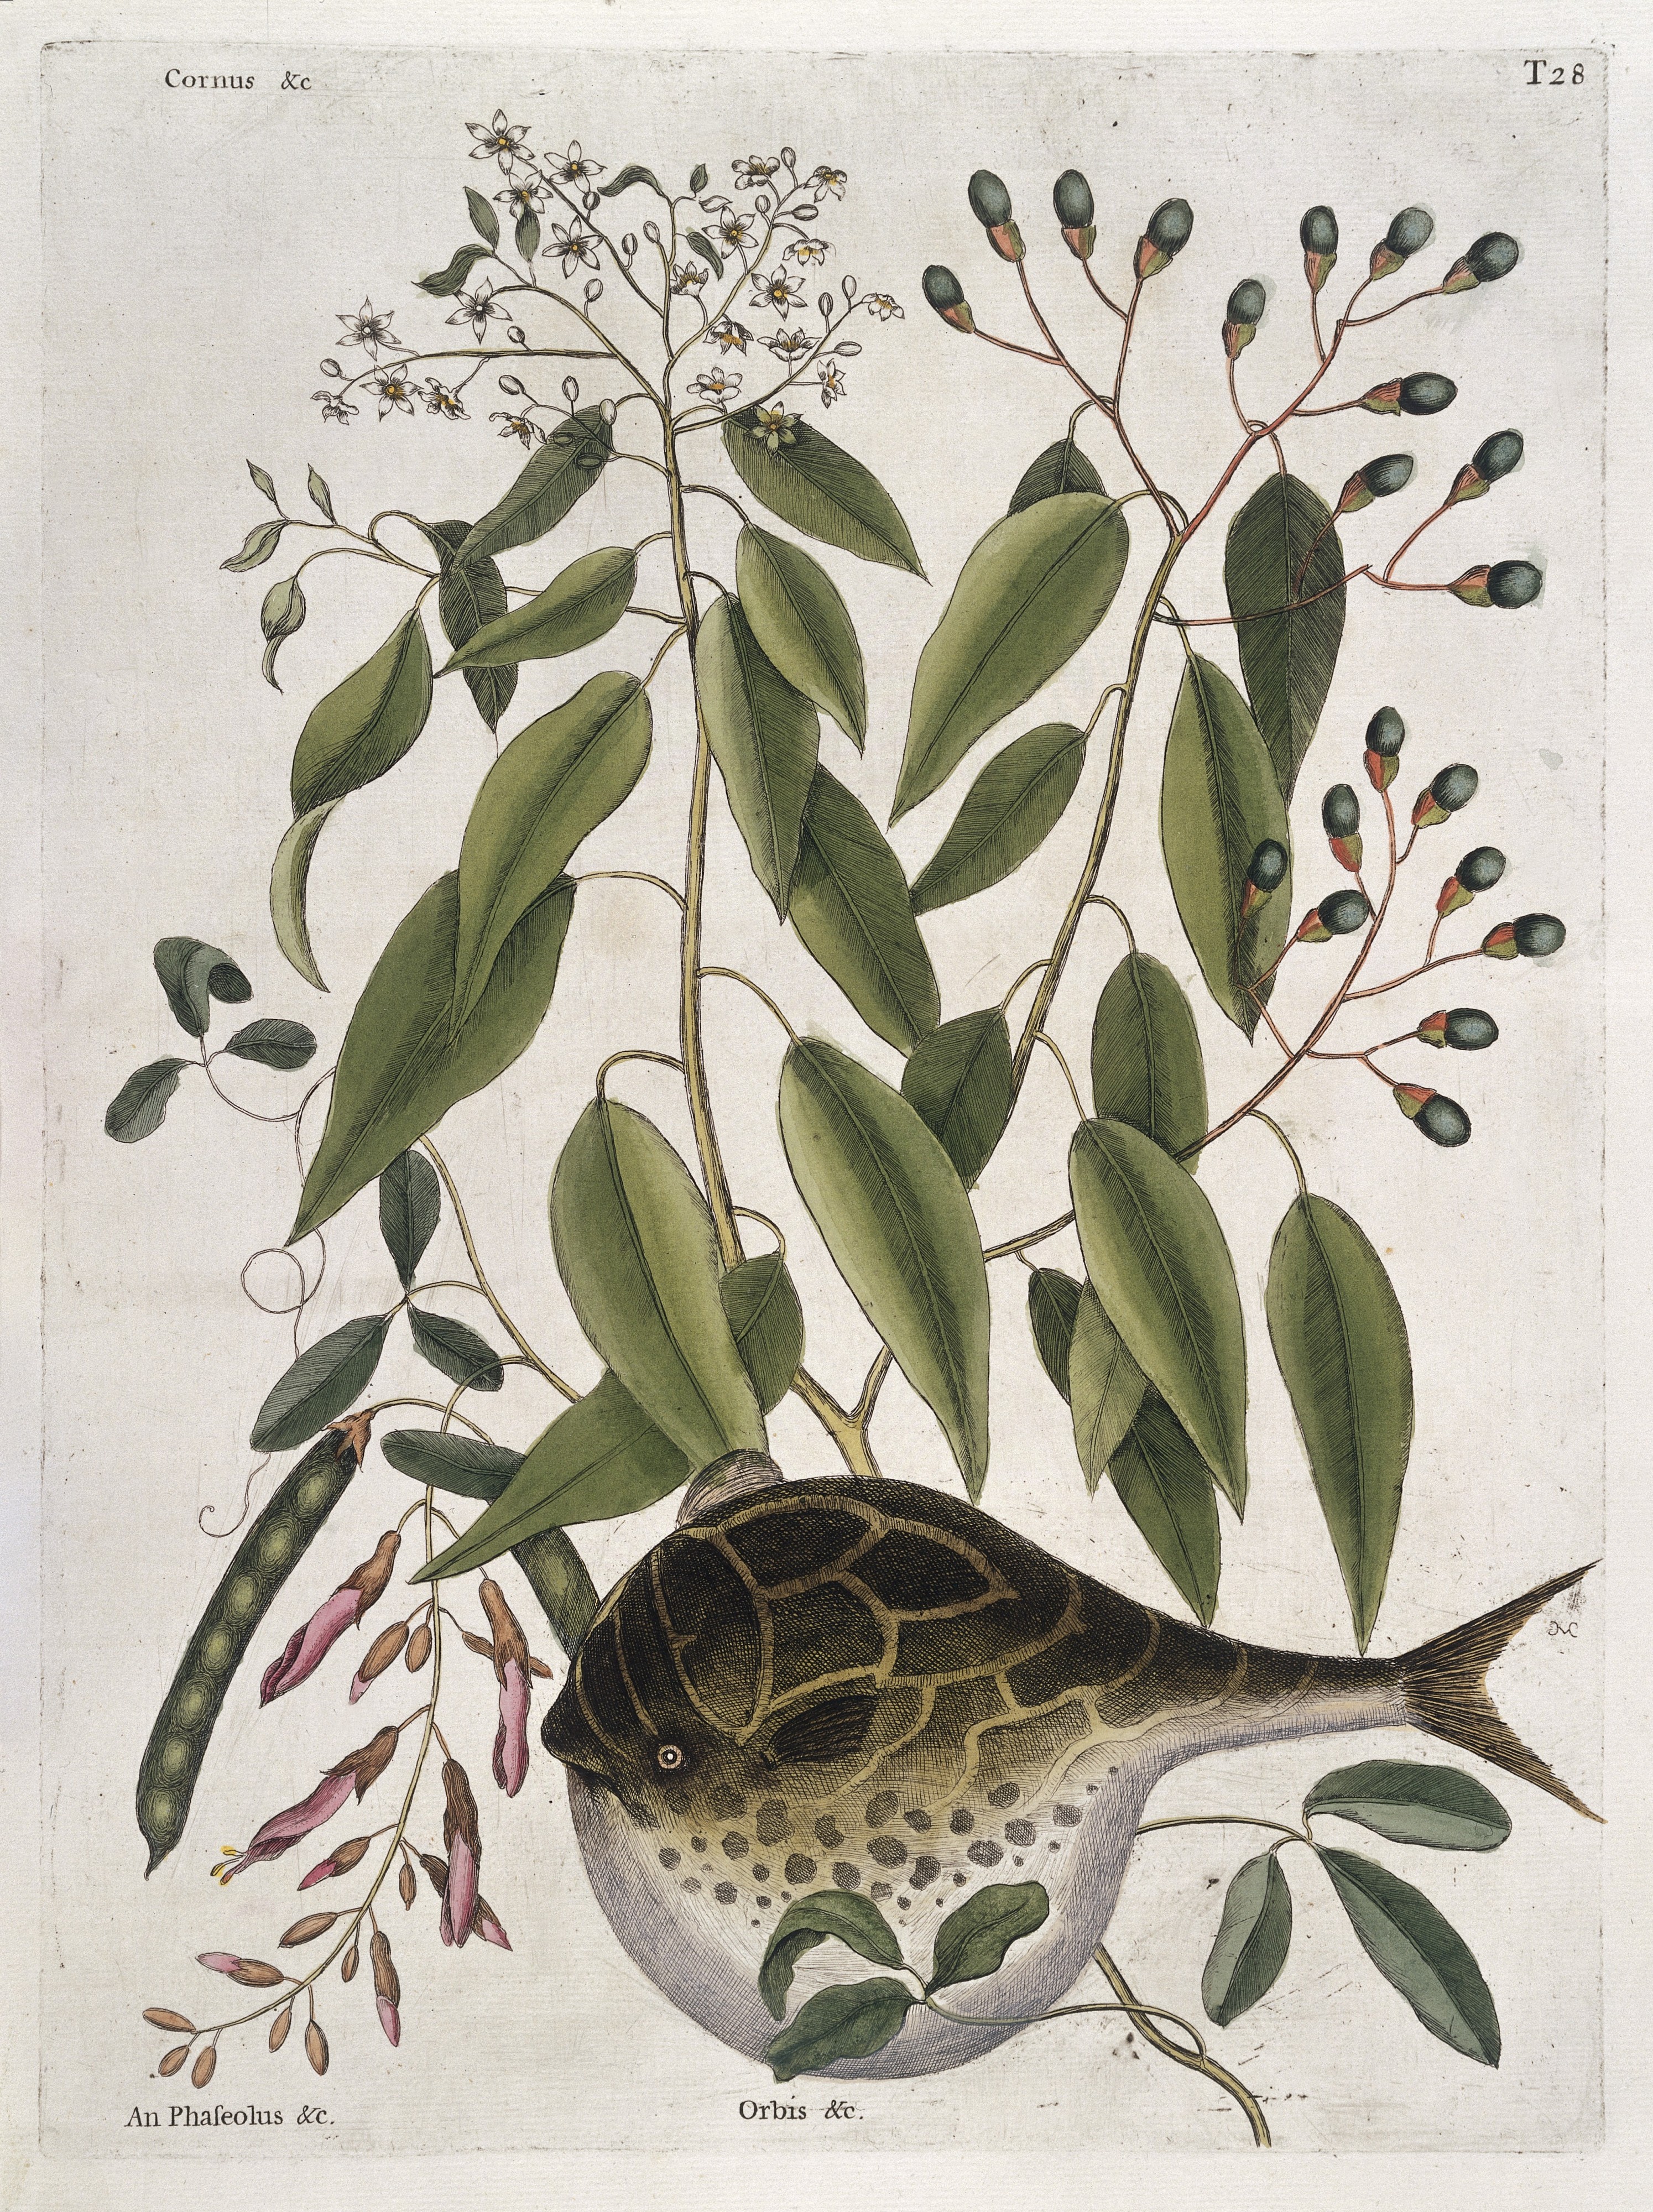 Globe fish with Cornus and An Phaseolus plants, 1731 Wellcome L0035367